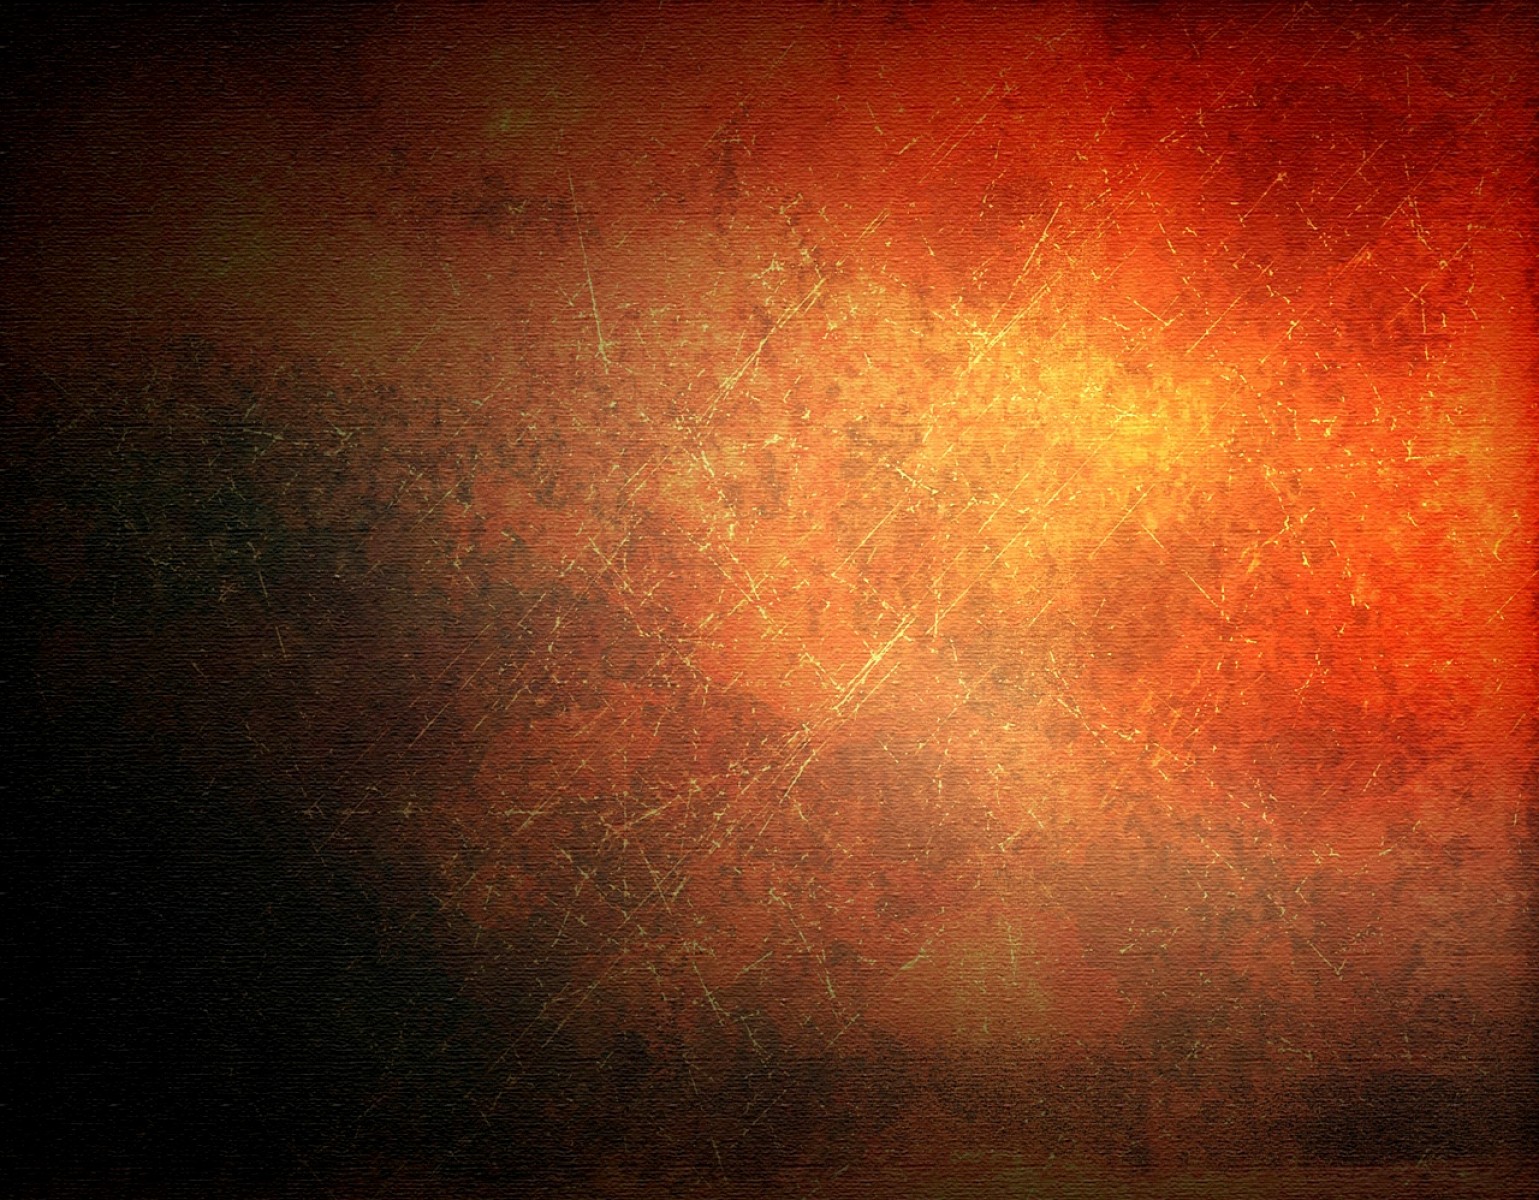 Free Download Texture Background Red Scratched Hd Wallpaper Full Hd Wallpapers 1539x1200 For Your Desktop Mobile Tablet Explore 75 Hd Wallpapers Textures Texture Wallpapers Hd Wood Wallpaper Black Wallpaper Texture